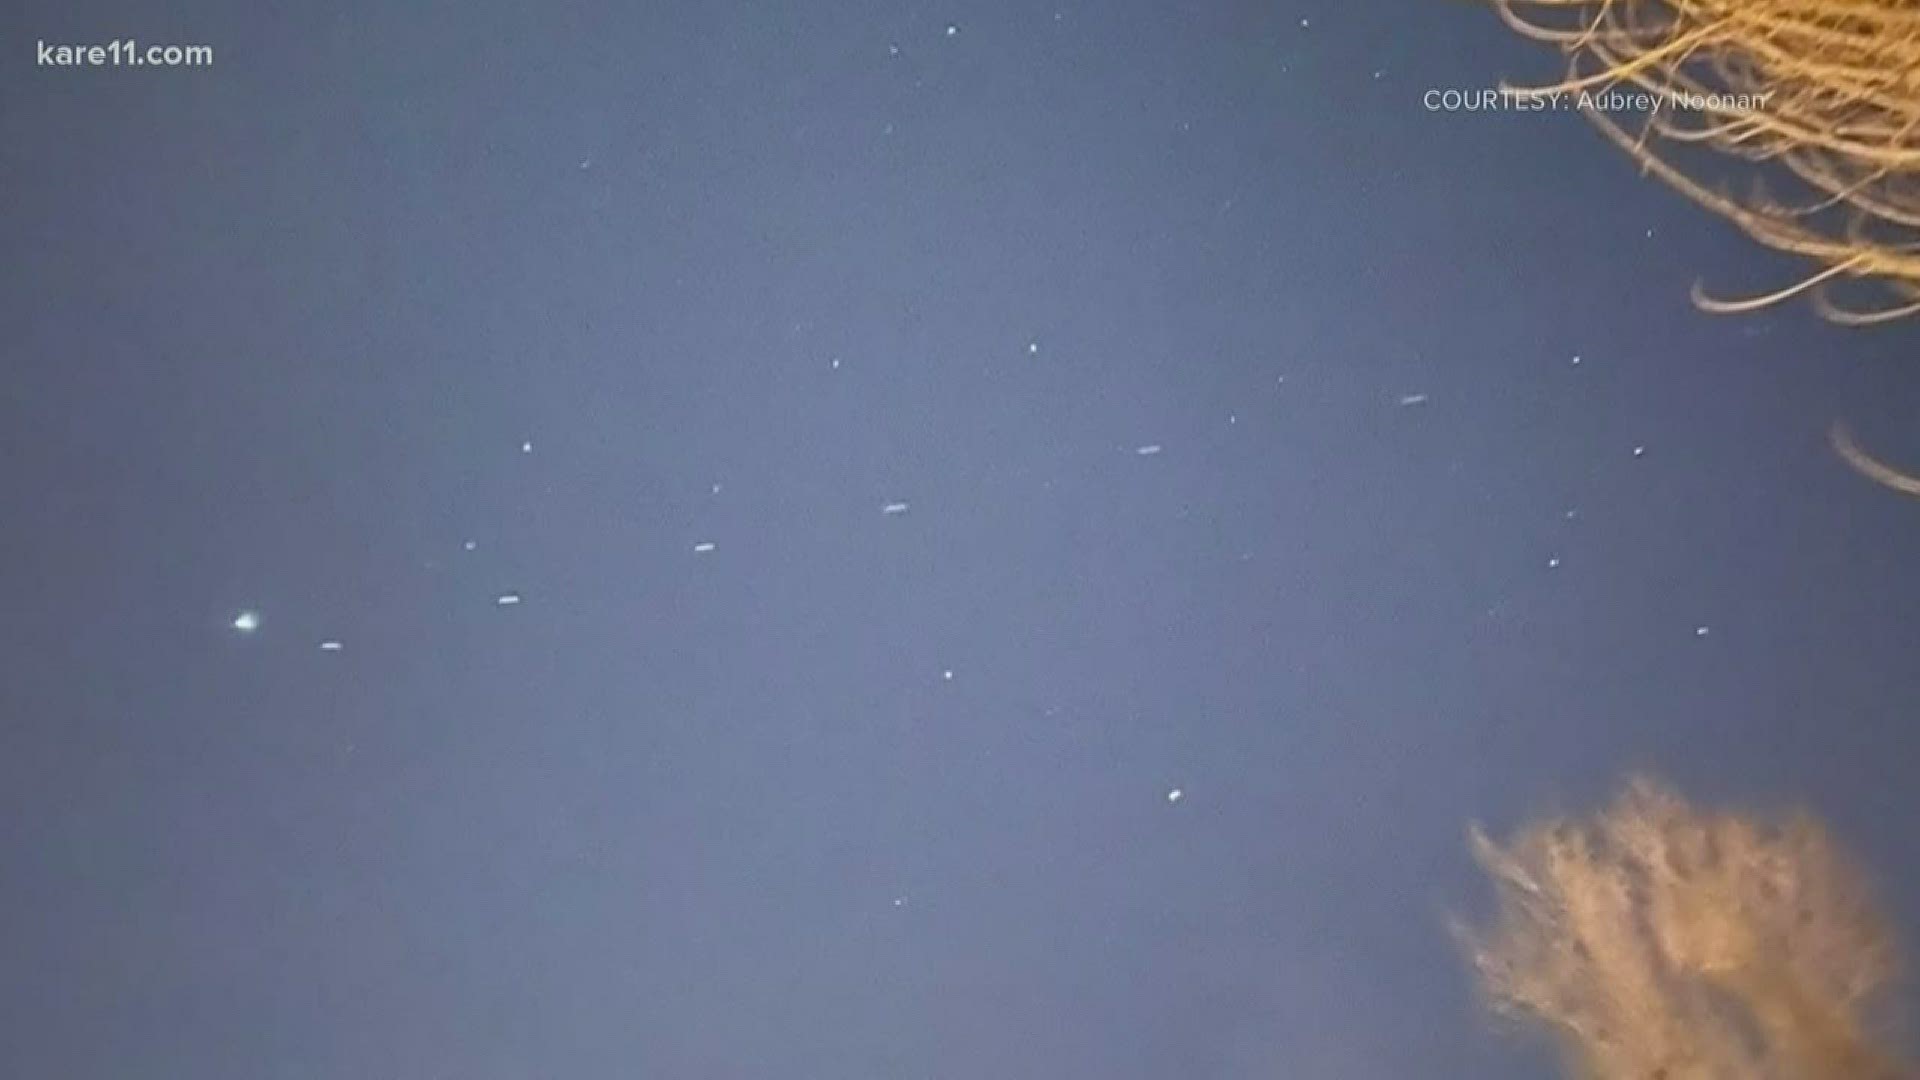 omfattende Ballade Planet What were those strange lights in the sky over the weekend? | kare11.com